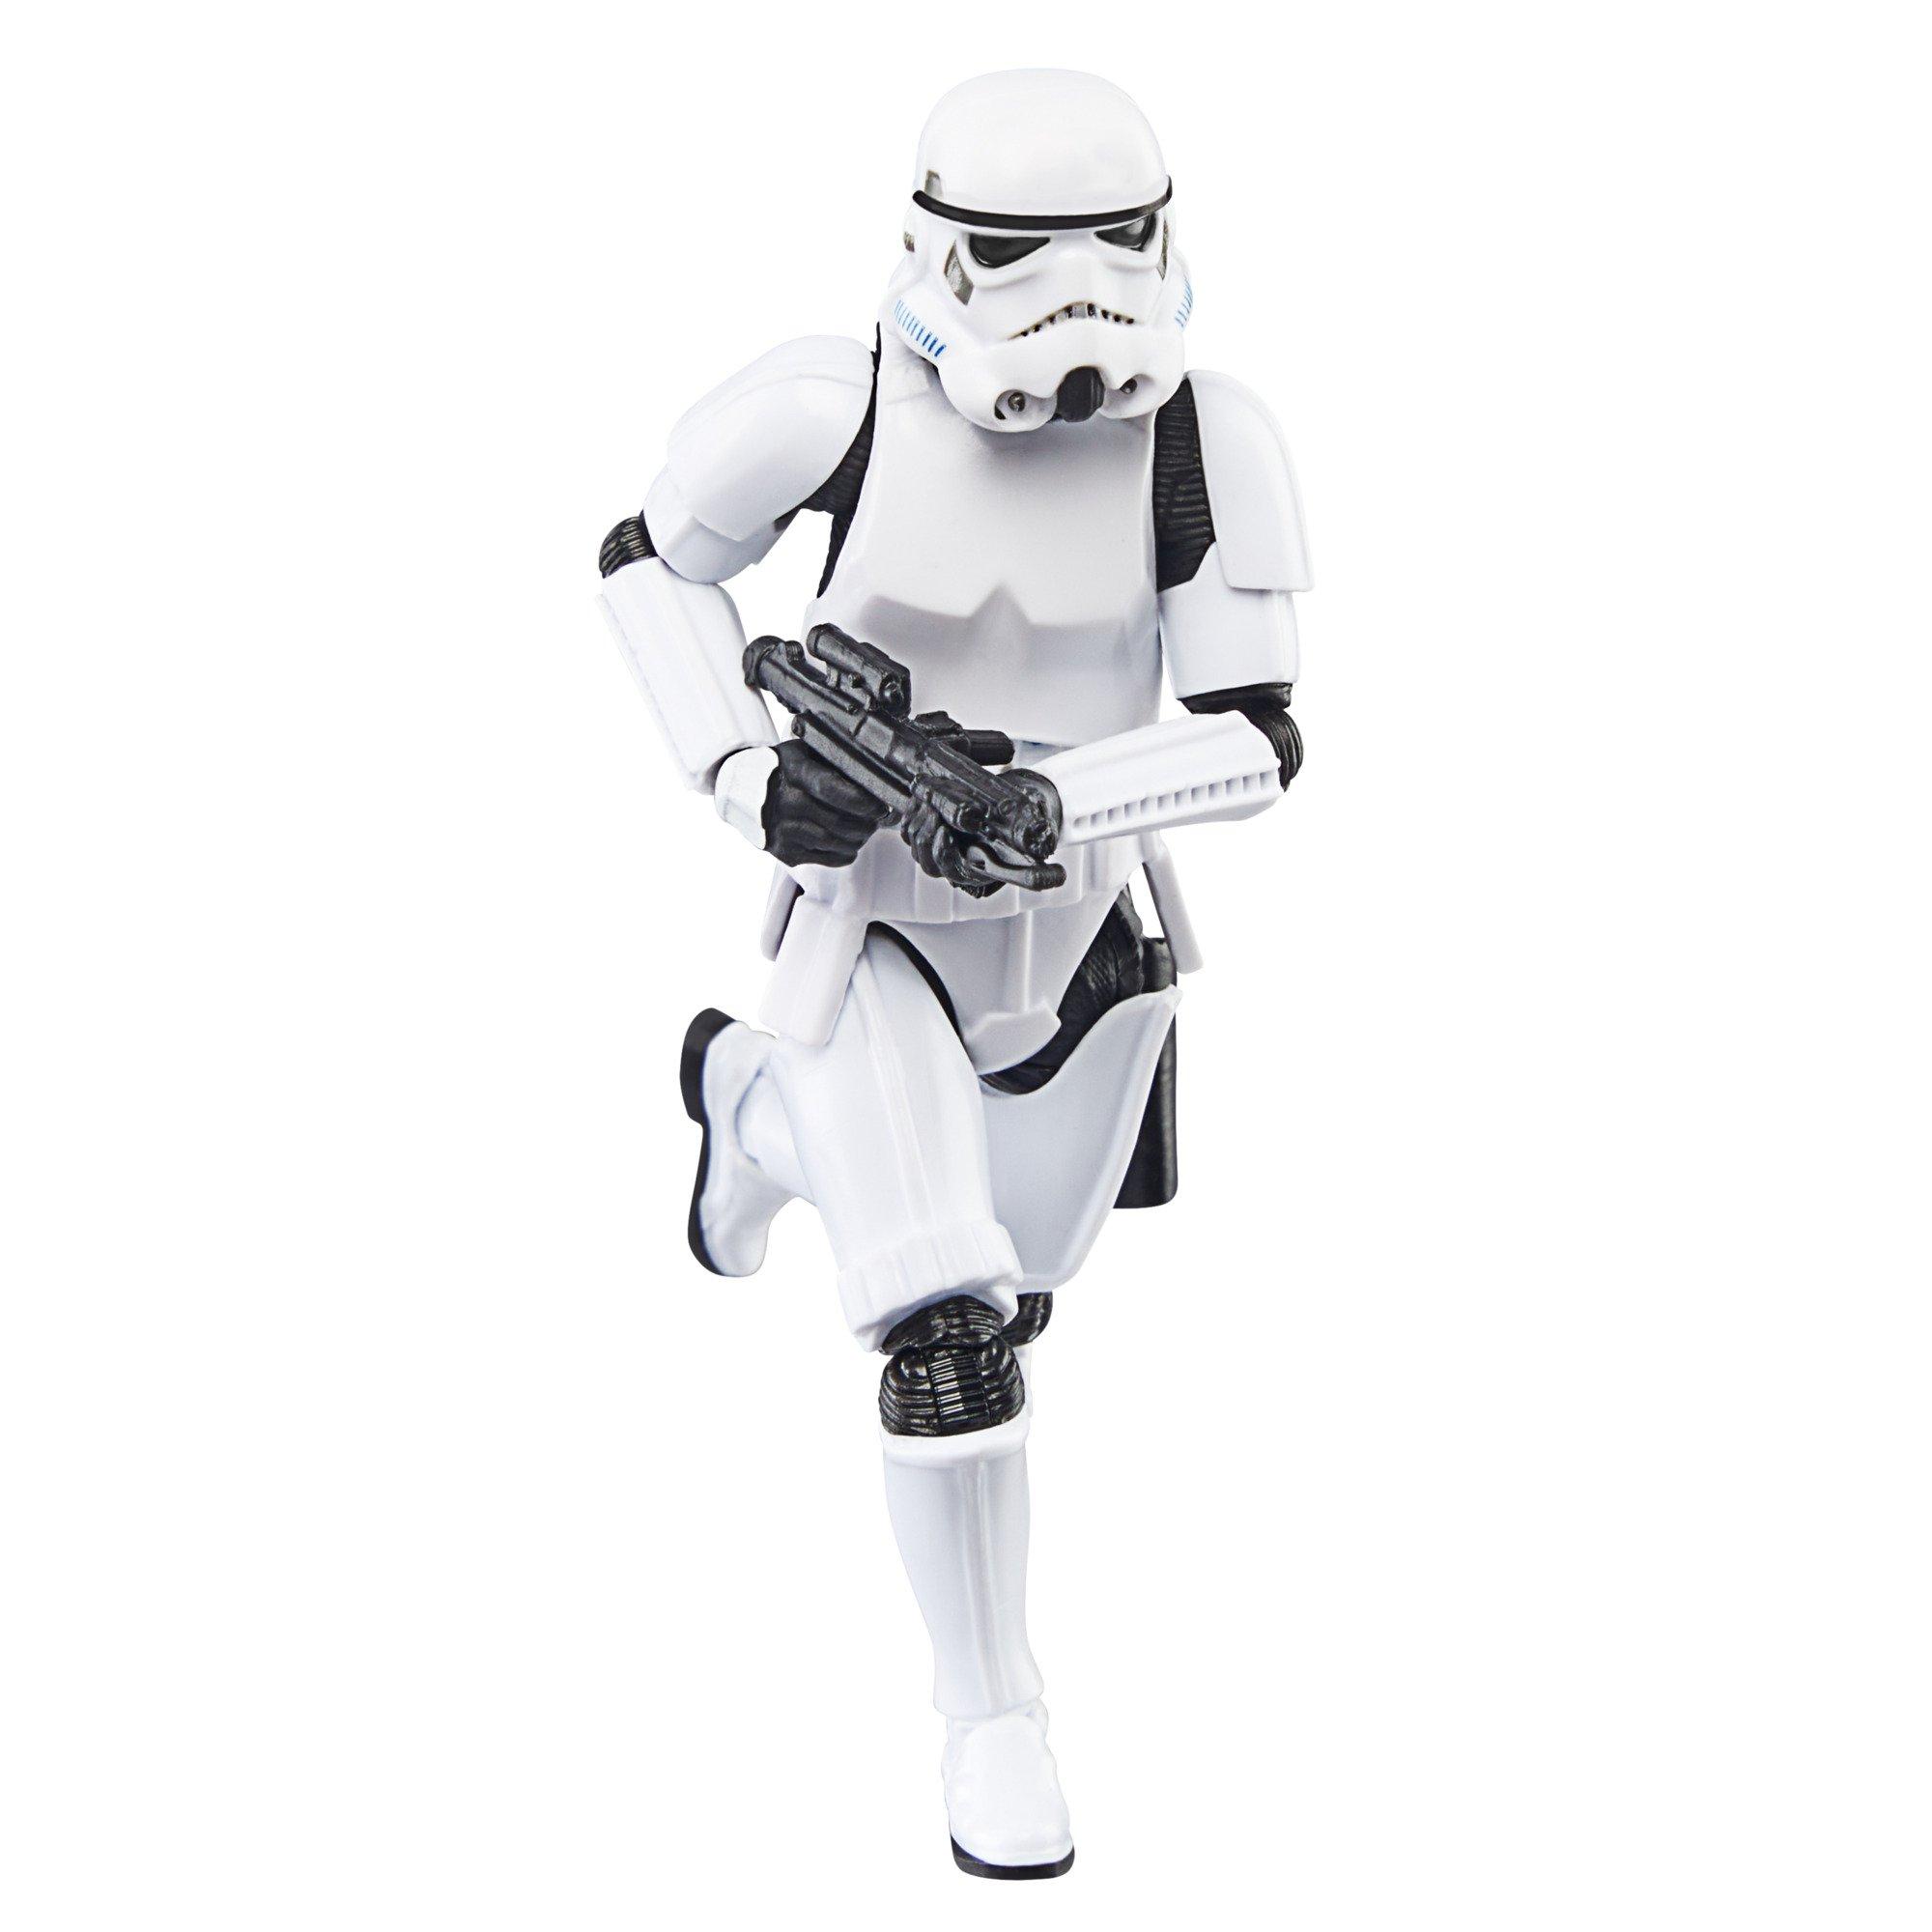 Hasbro Star Wars The Vintage Collection Star Wars: A New Hope Stormtrooper 3.75-inch Action Figure